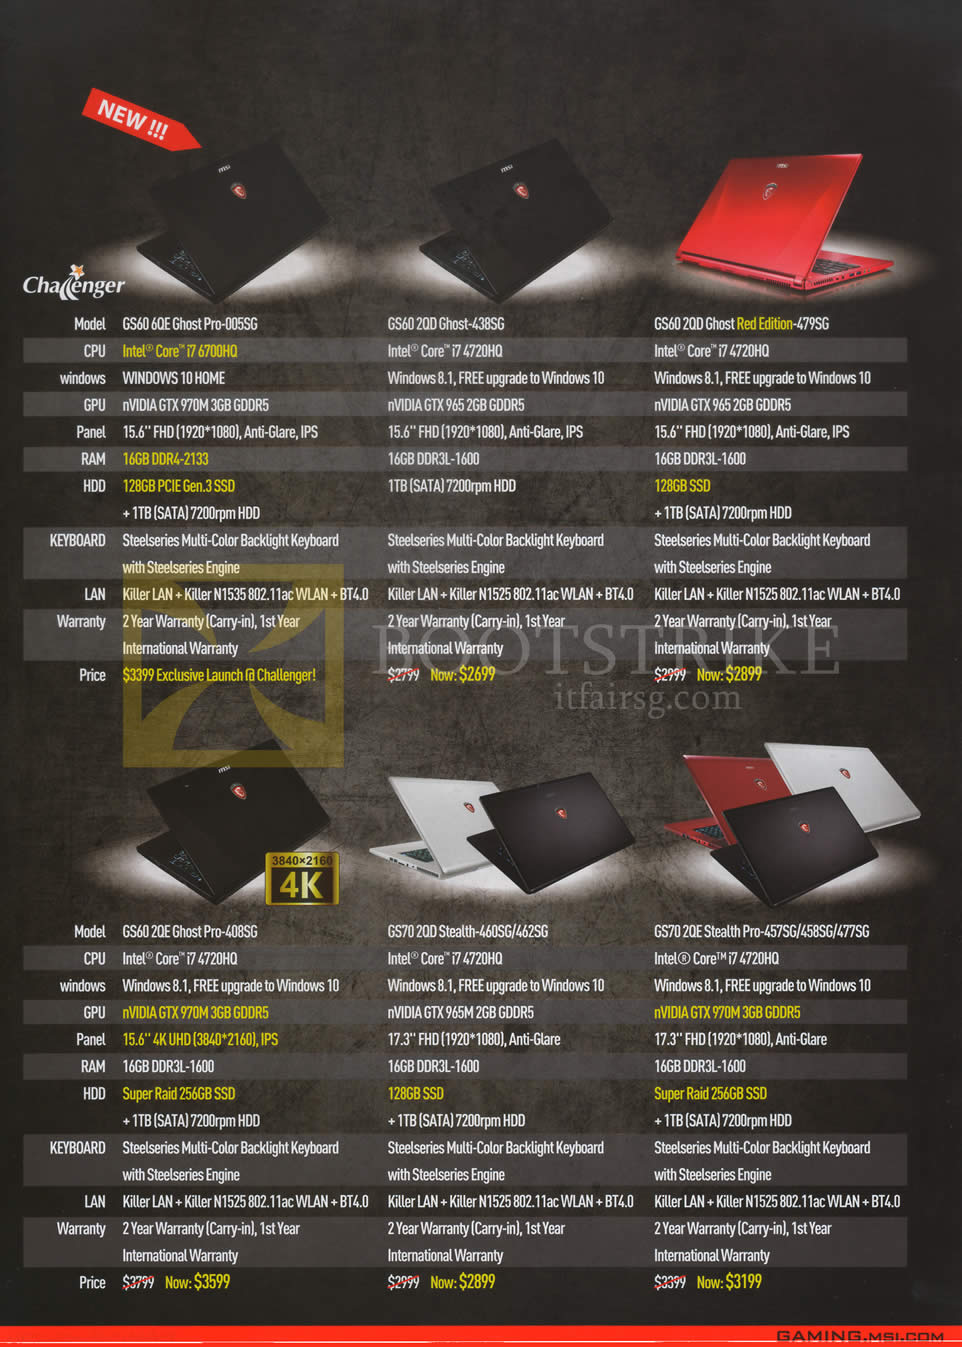 COMEX 2015 price list image brochure of MSI Notebooks GS60 60E Ghost Pro-005SG, GS60 2QD Ghost-438SG, GS60 2QD Ghost Red Edition-479SG, GS60 2QE Ghost Pro-408SG, GS70 2QD Stealth-460SG, 462SG